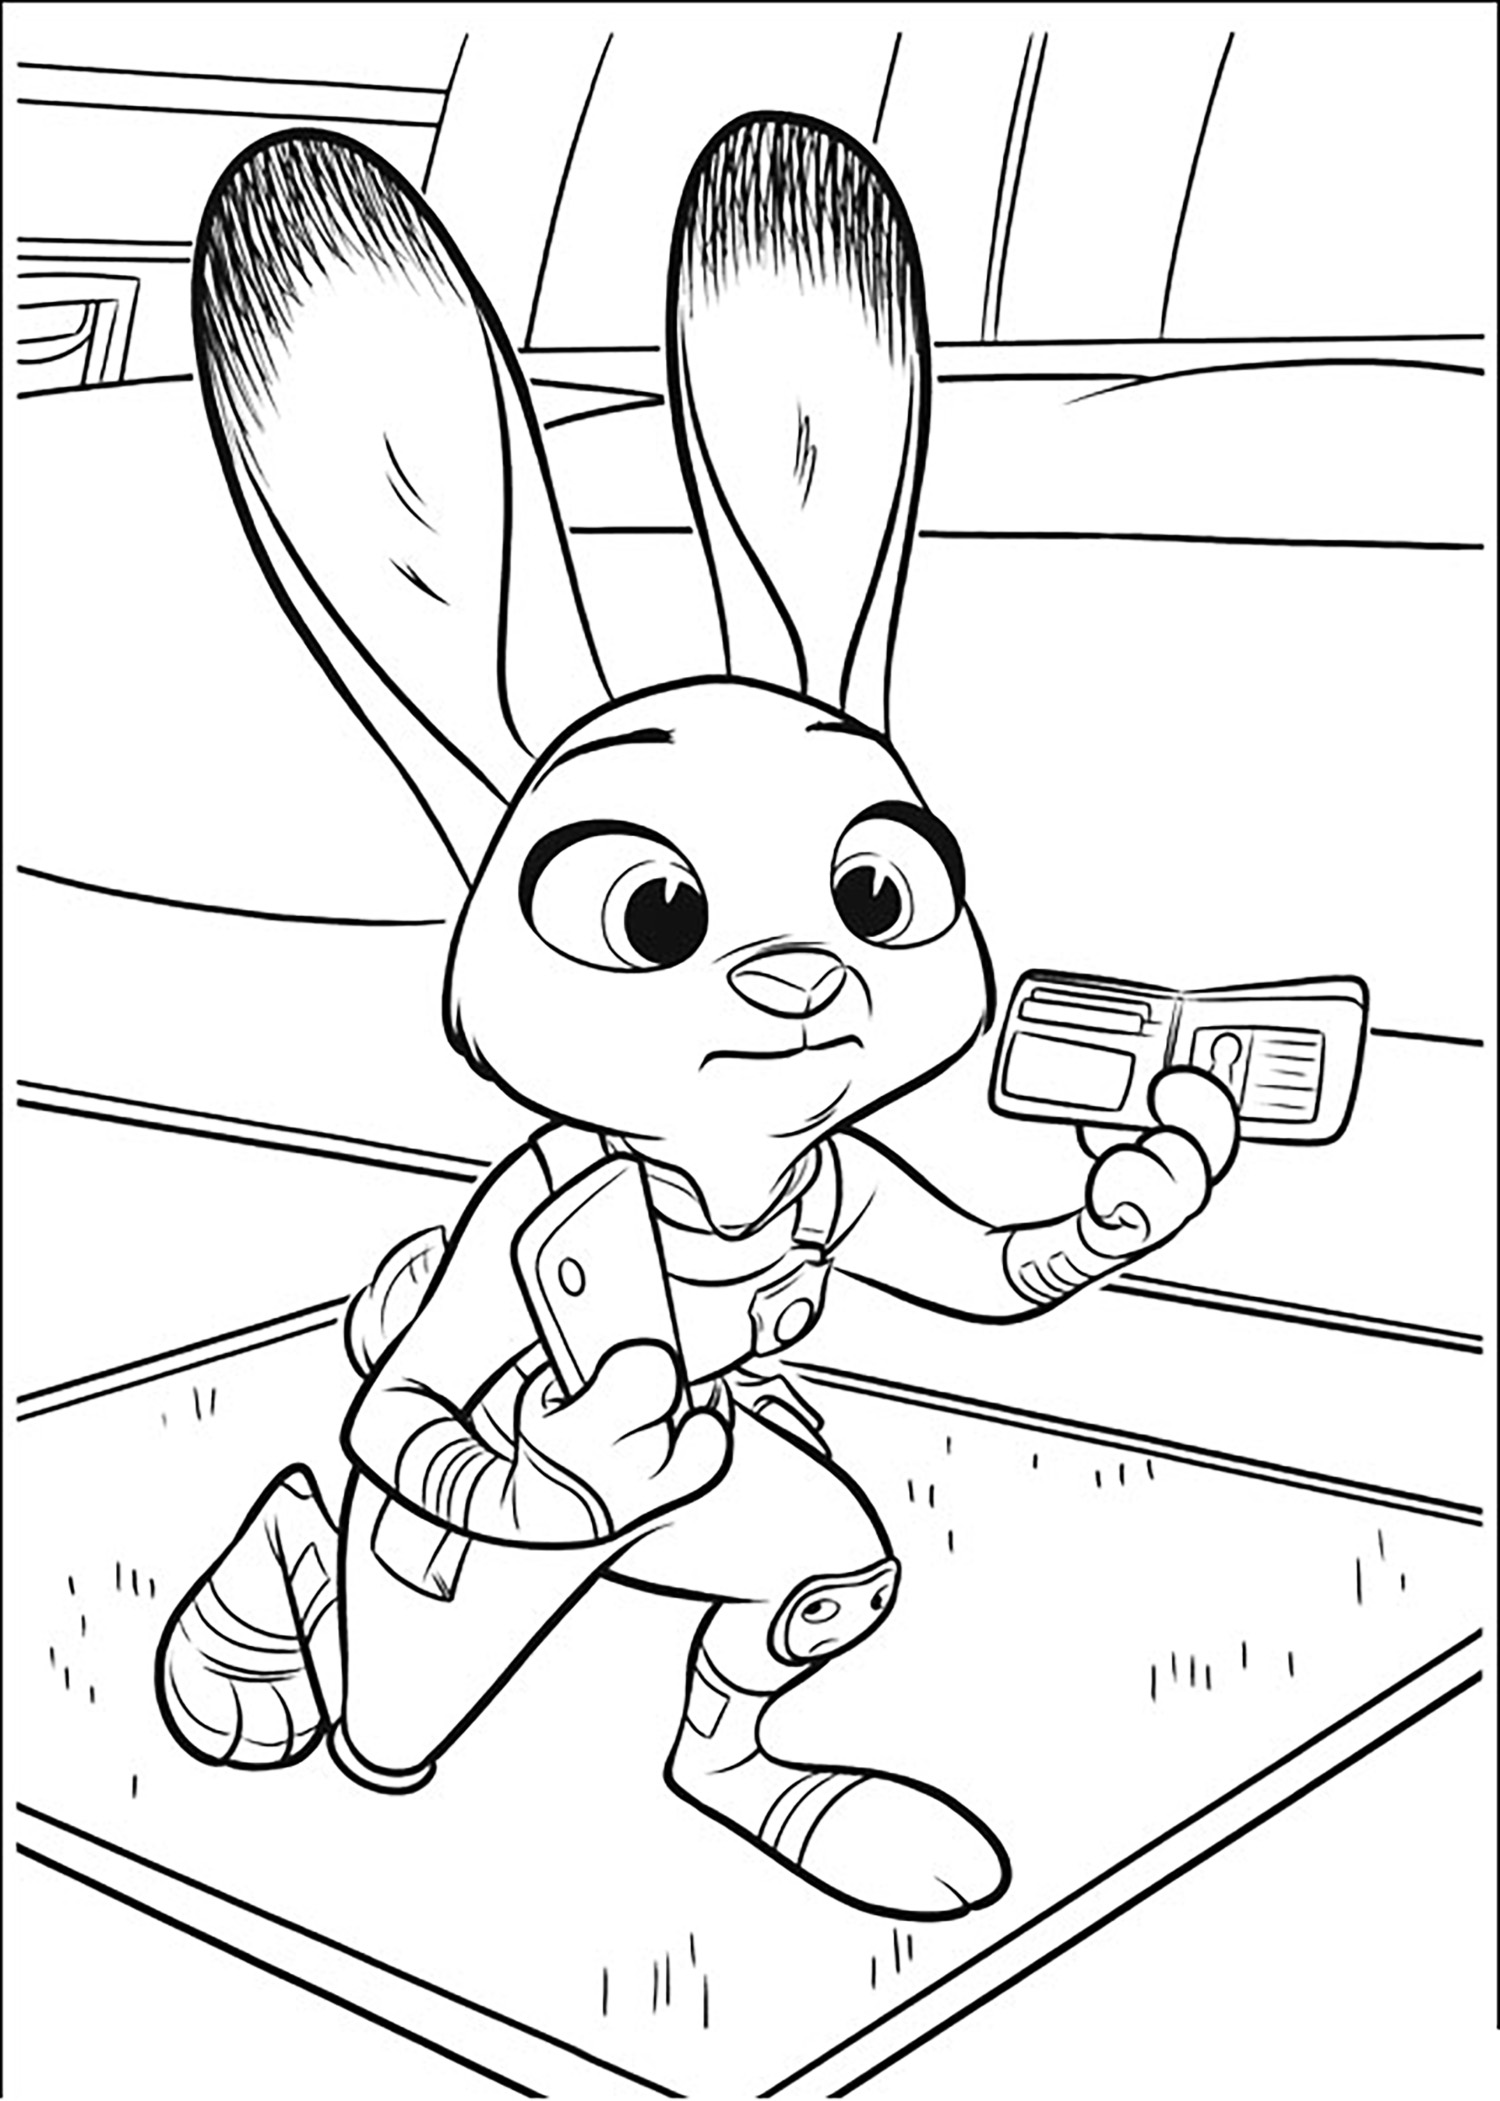 Zootopia to color for kids   Zootopia Kids Coloring Pages